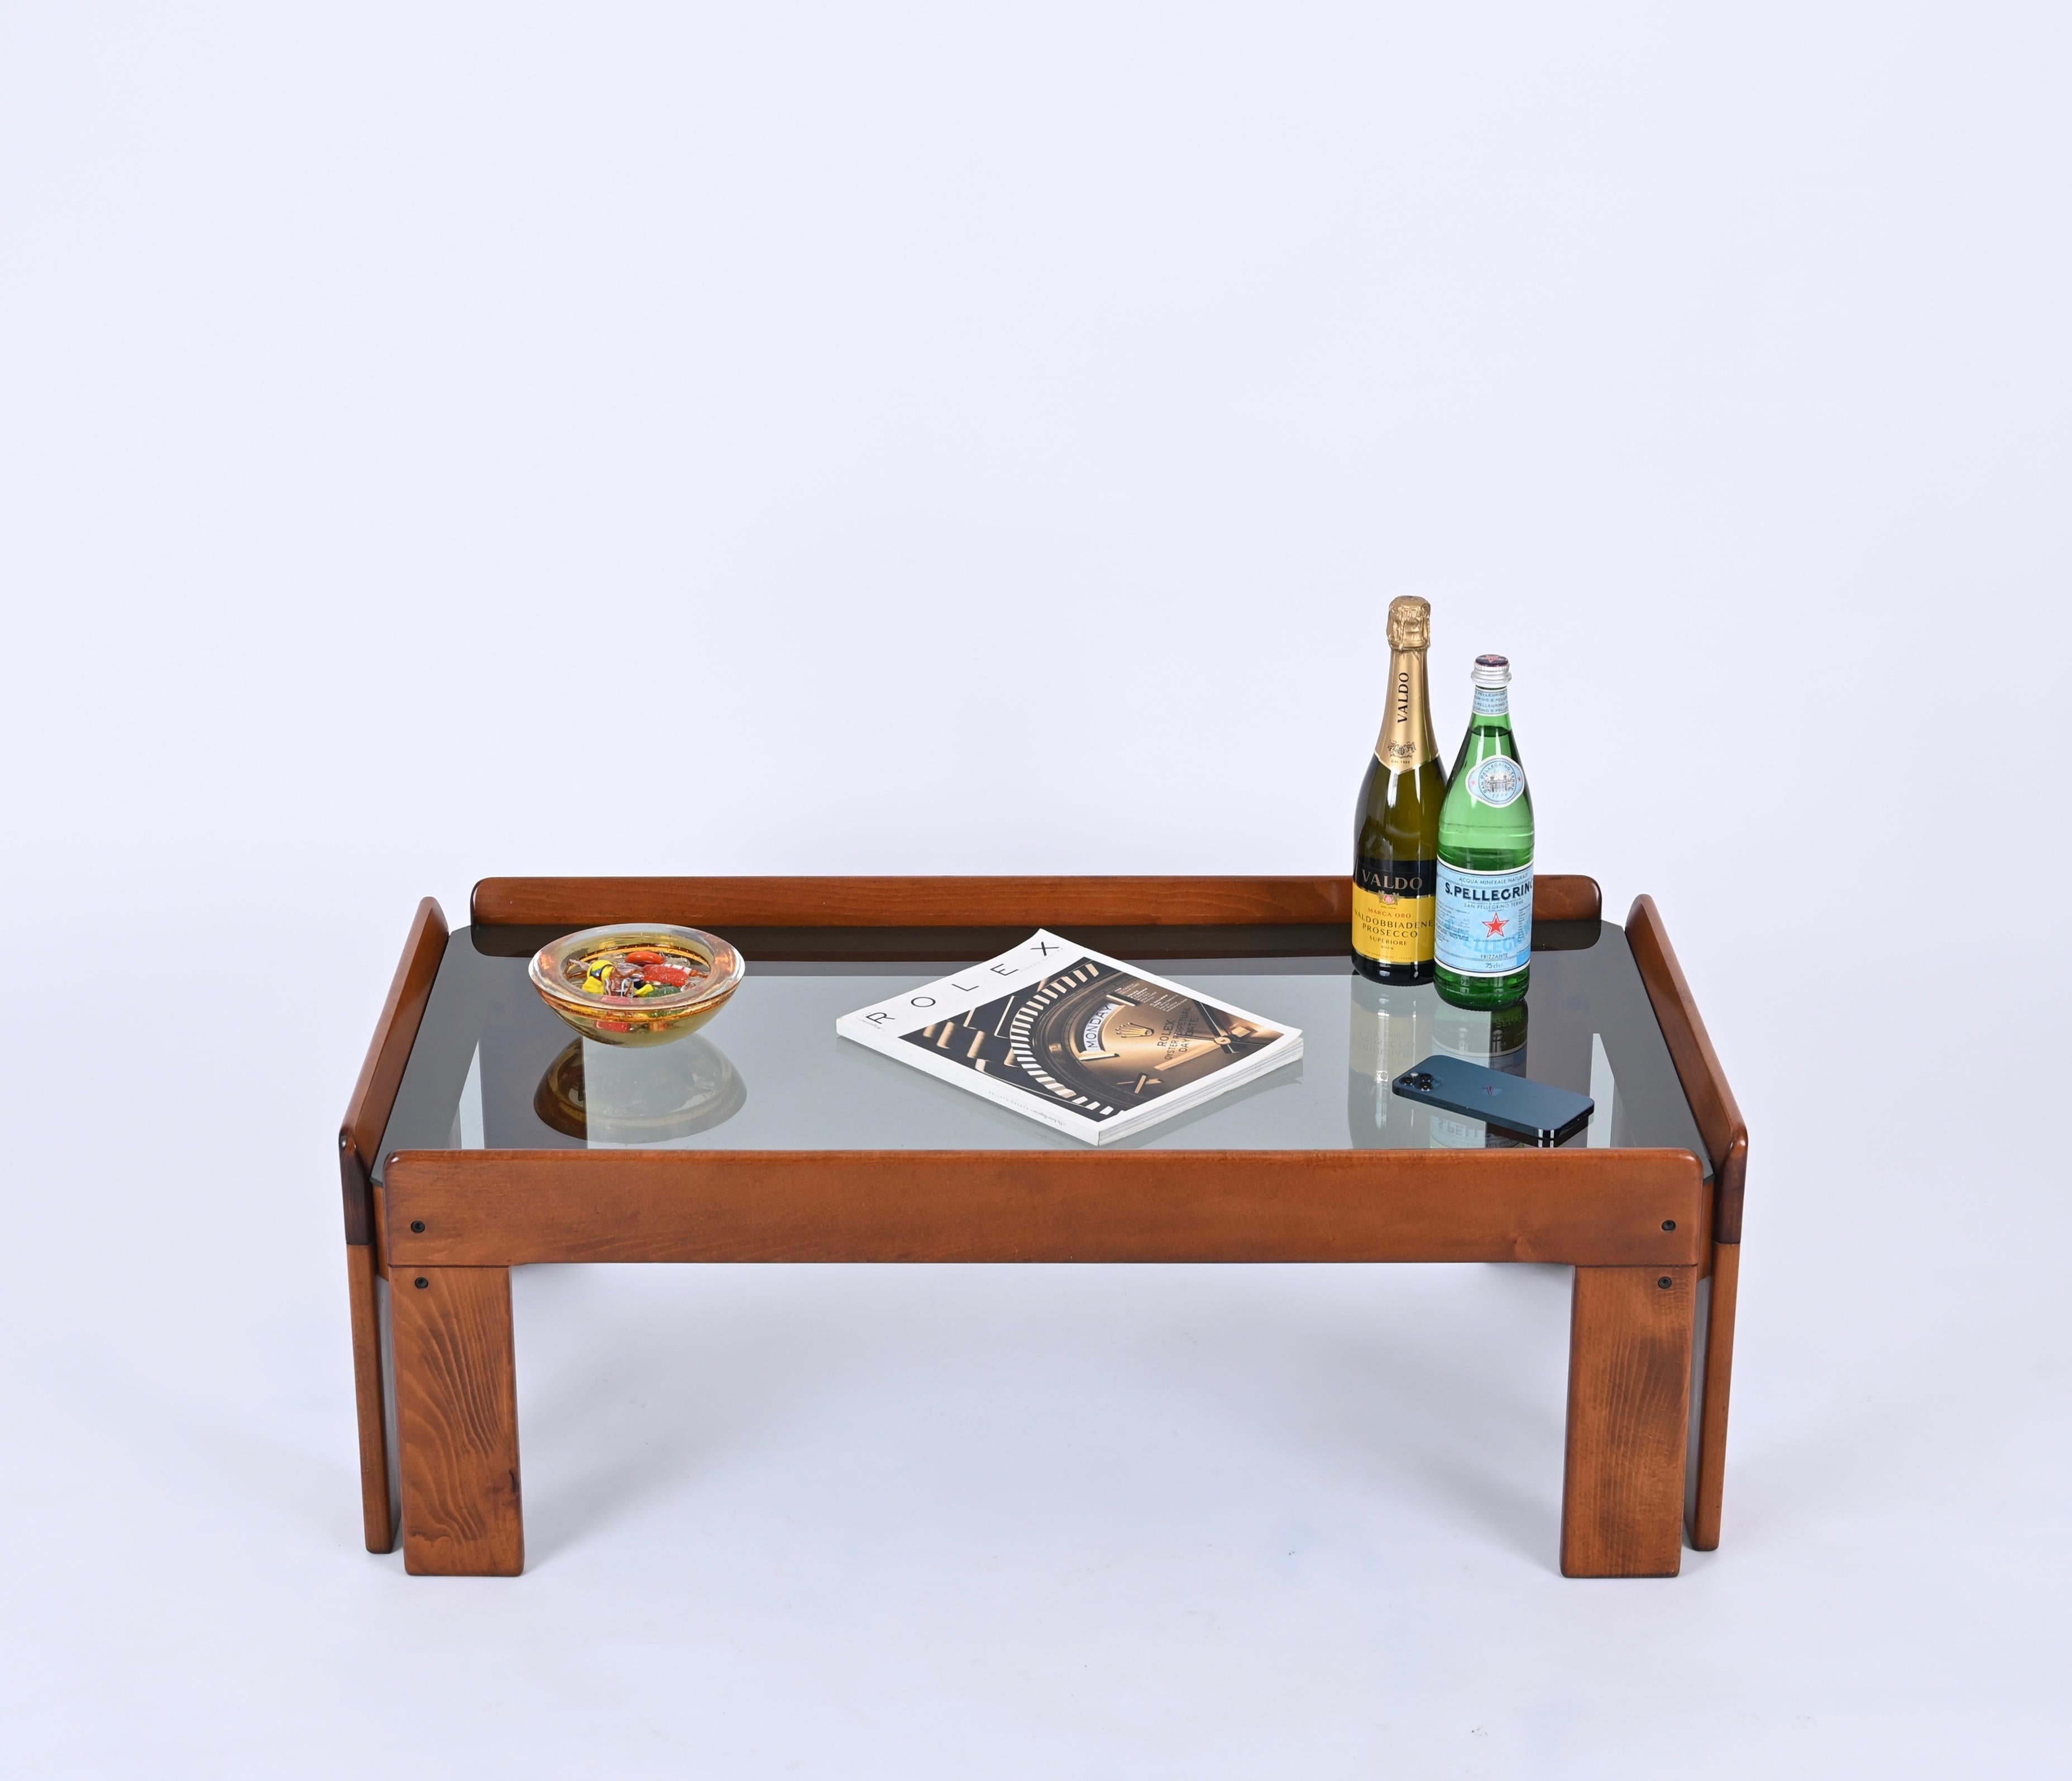 Stunning midcentury rectangular coffee table in walnut designed by Afra & Tobia Scarpa for Gavina in Italy in the 1960s.  

This gorgeous coffee table is made in solid walnut of outstanding quality, the wood grains of the wood are incredibly